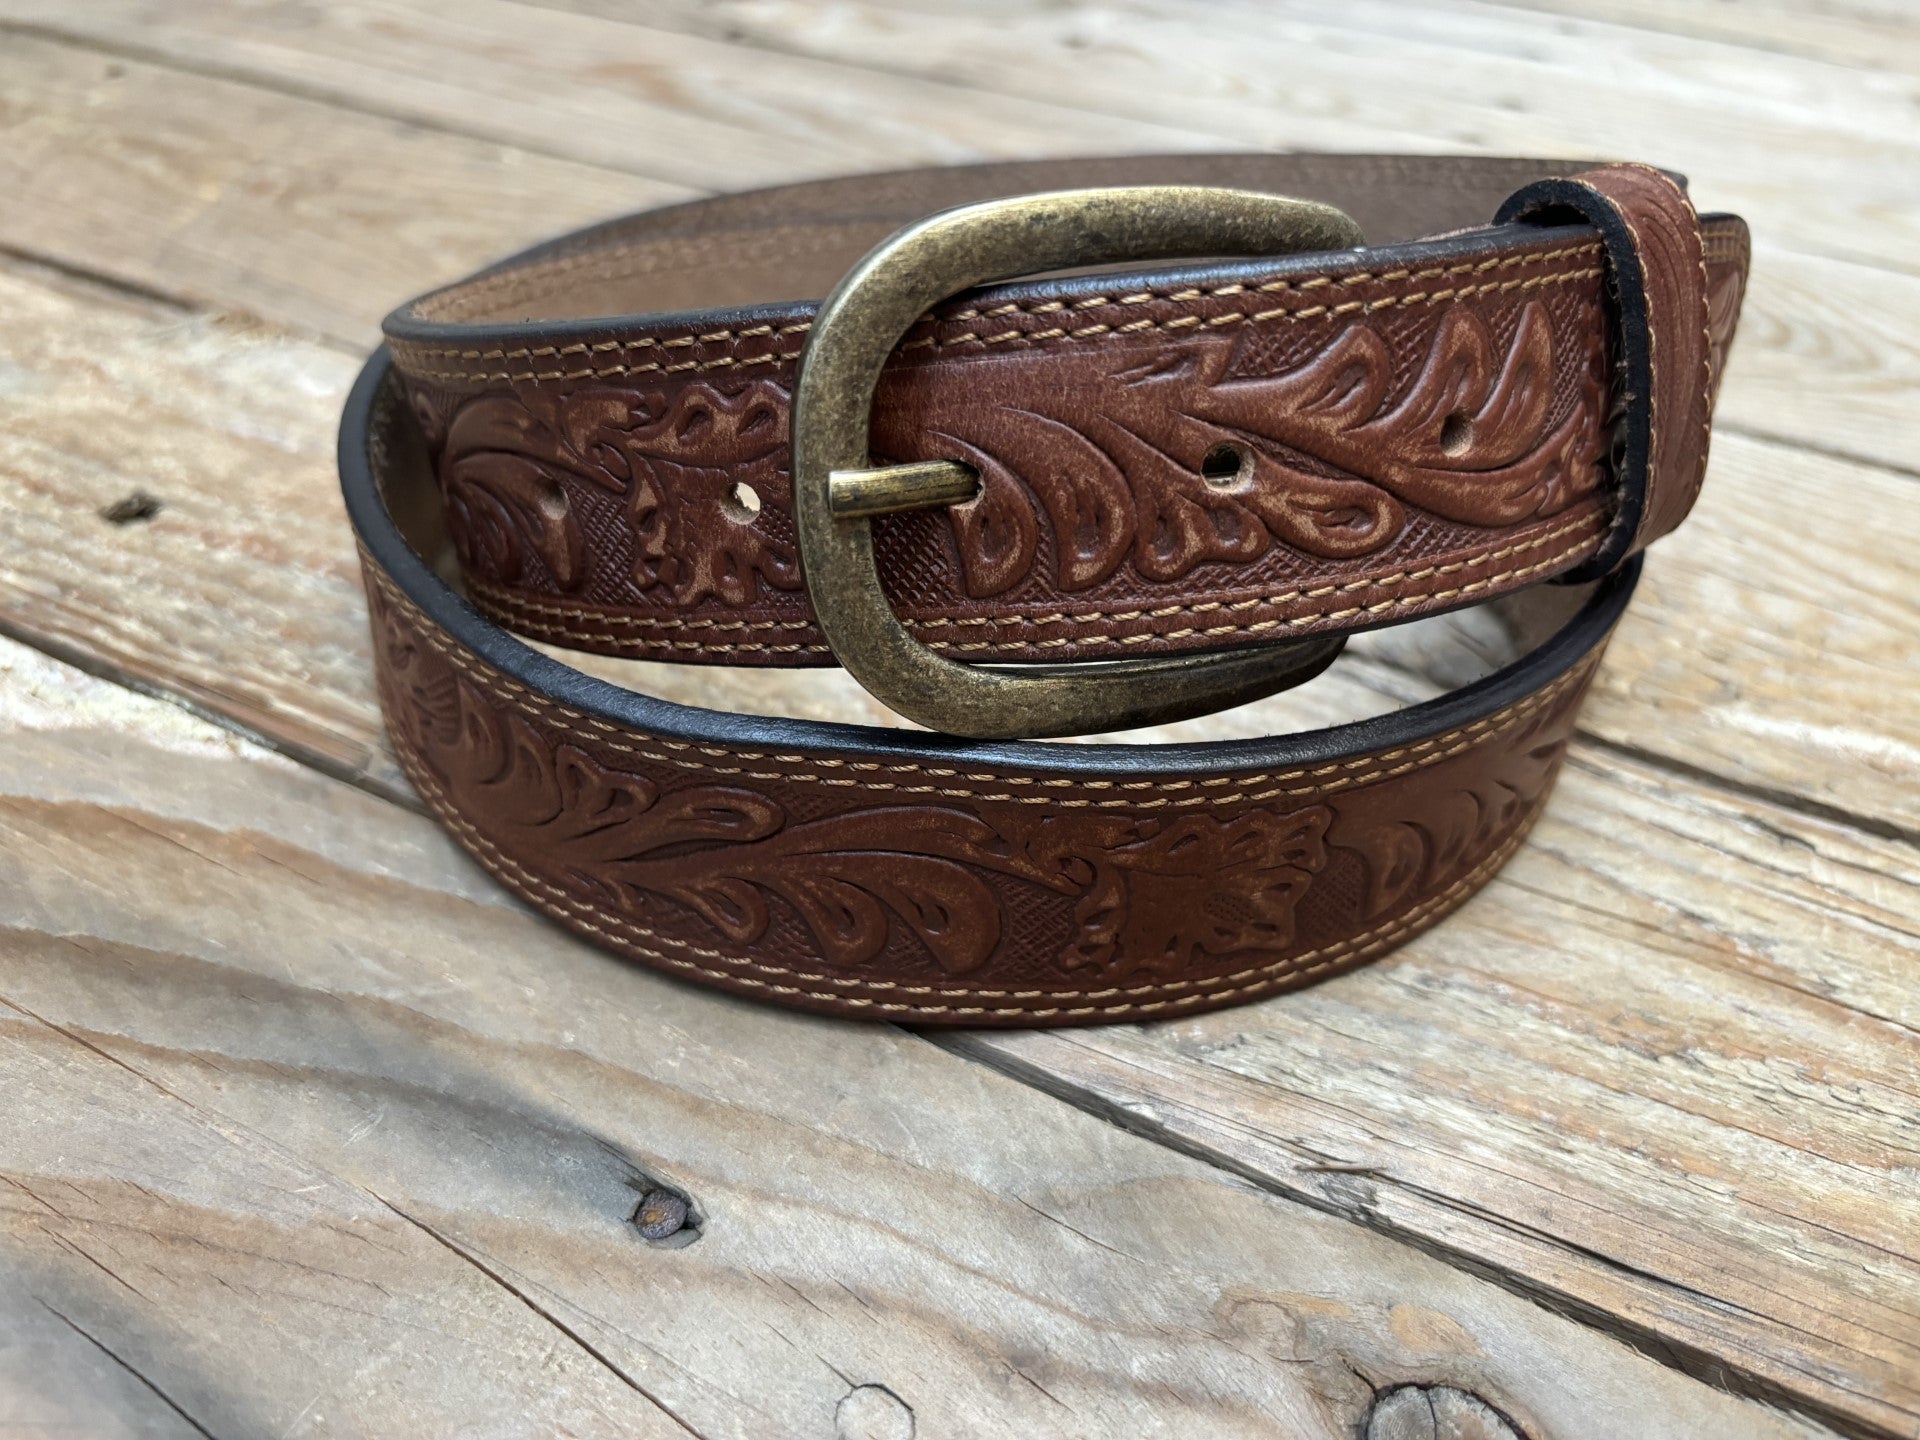 Womens Roper Floral Embossed Distressed Leather Belt - Tan (7021185105997)